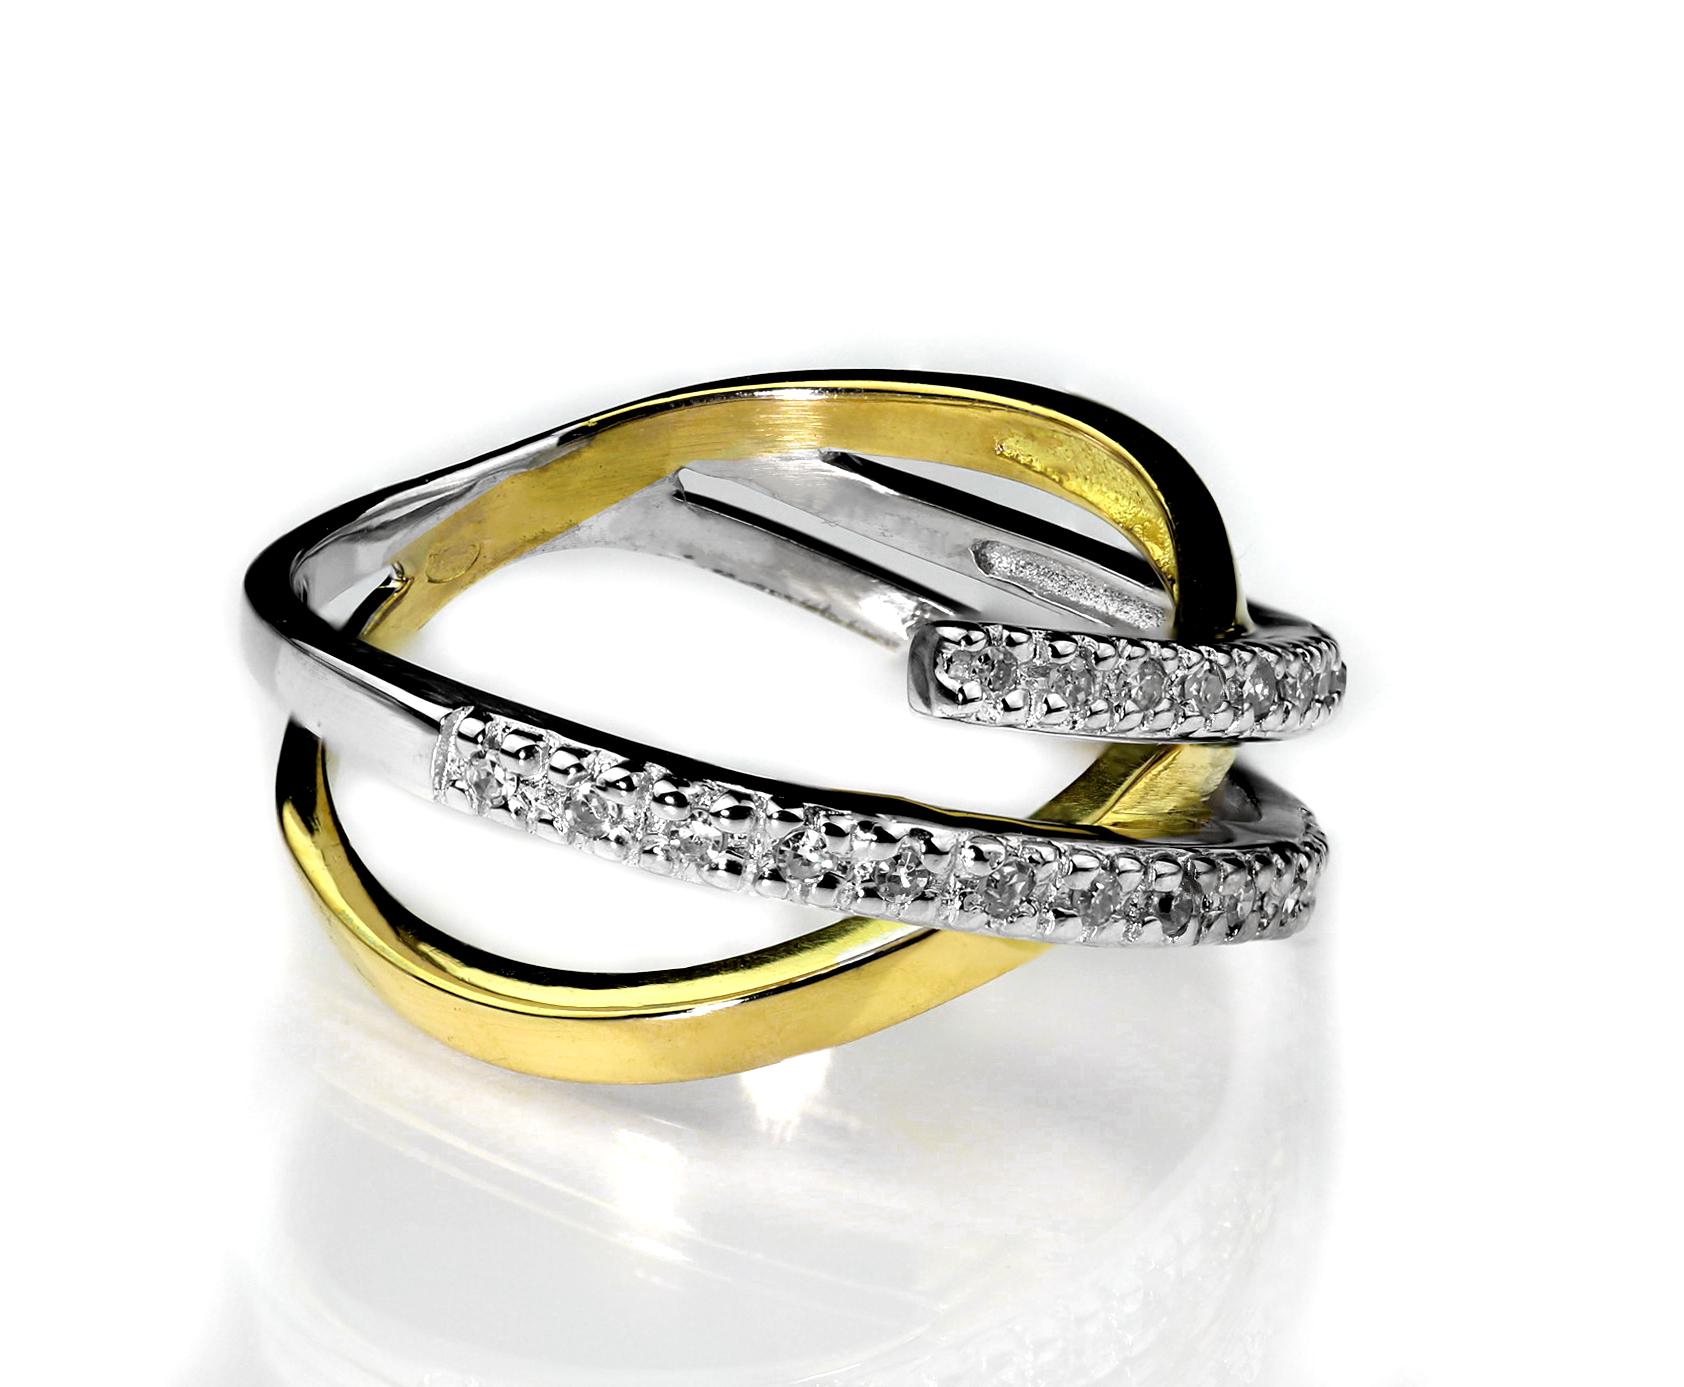 Abstract Design Diamond Ring Set in 18 Carat Yellow and White Gold, French In Excellent Condition For Sale In London, GB